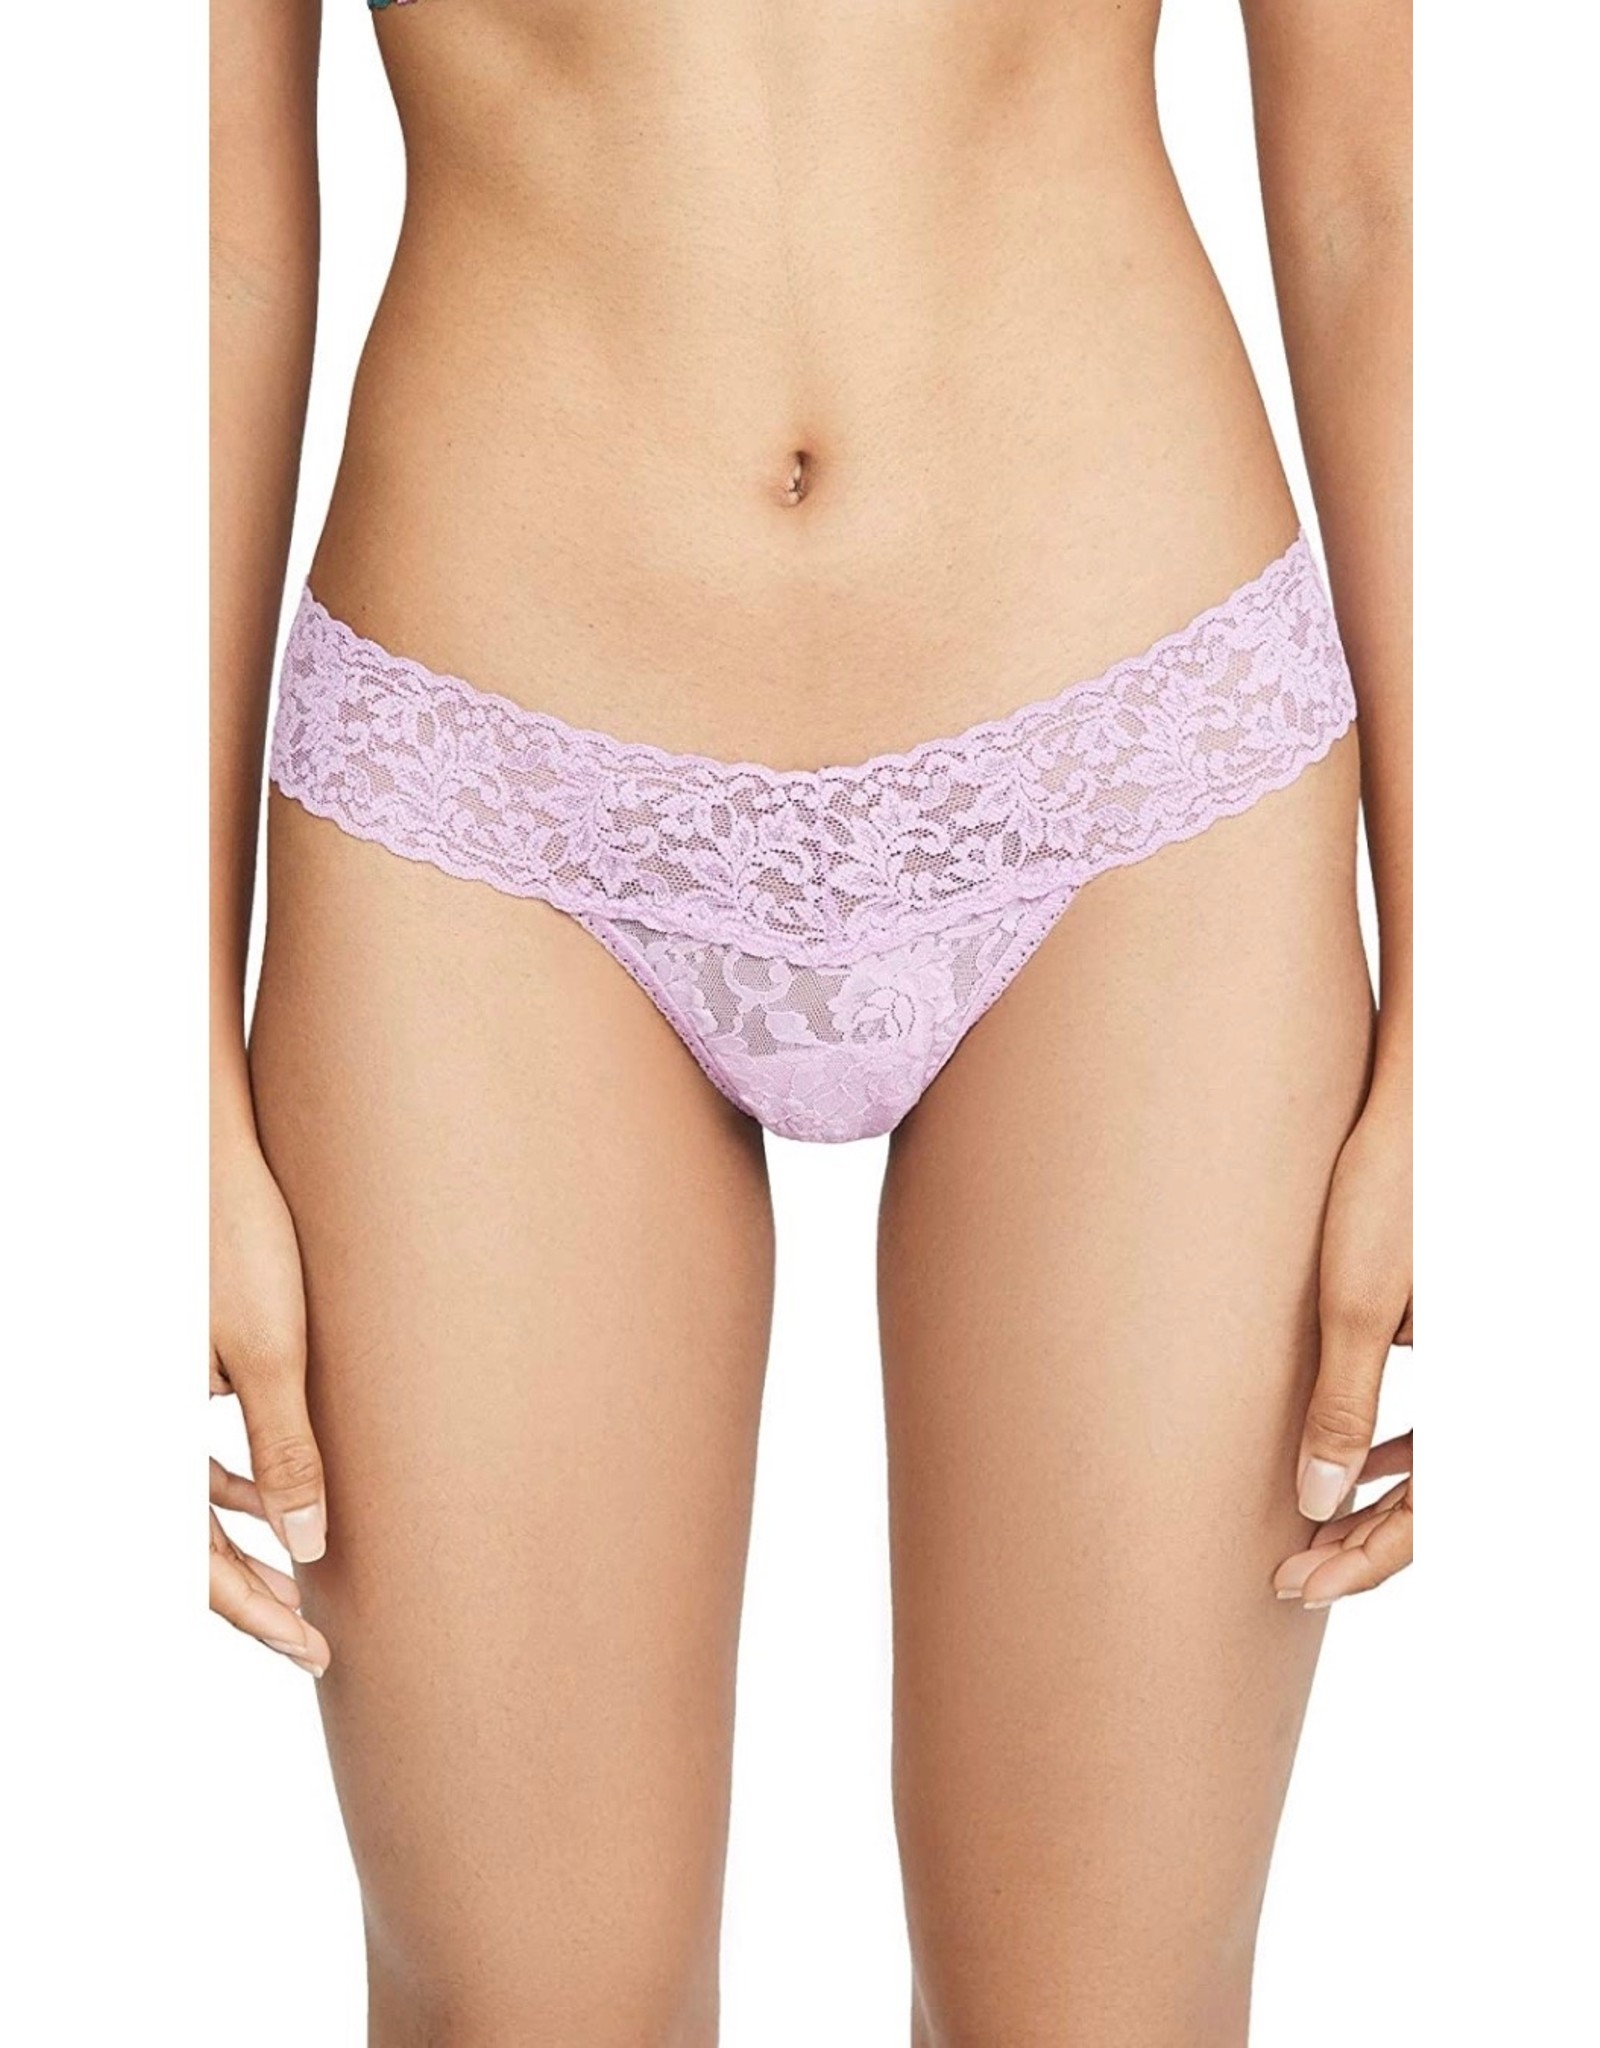 Hanky Panky Hanky Panky Signiture Lace Low Rise Thong 4911